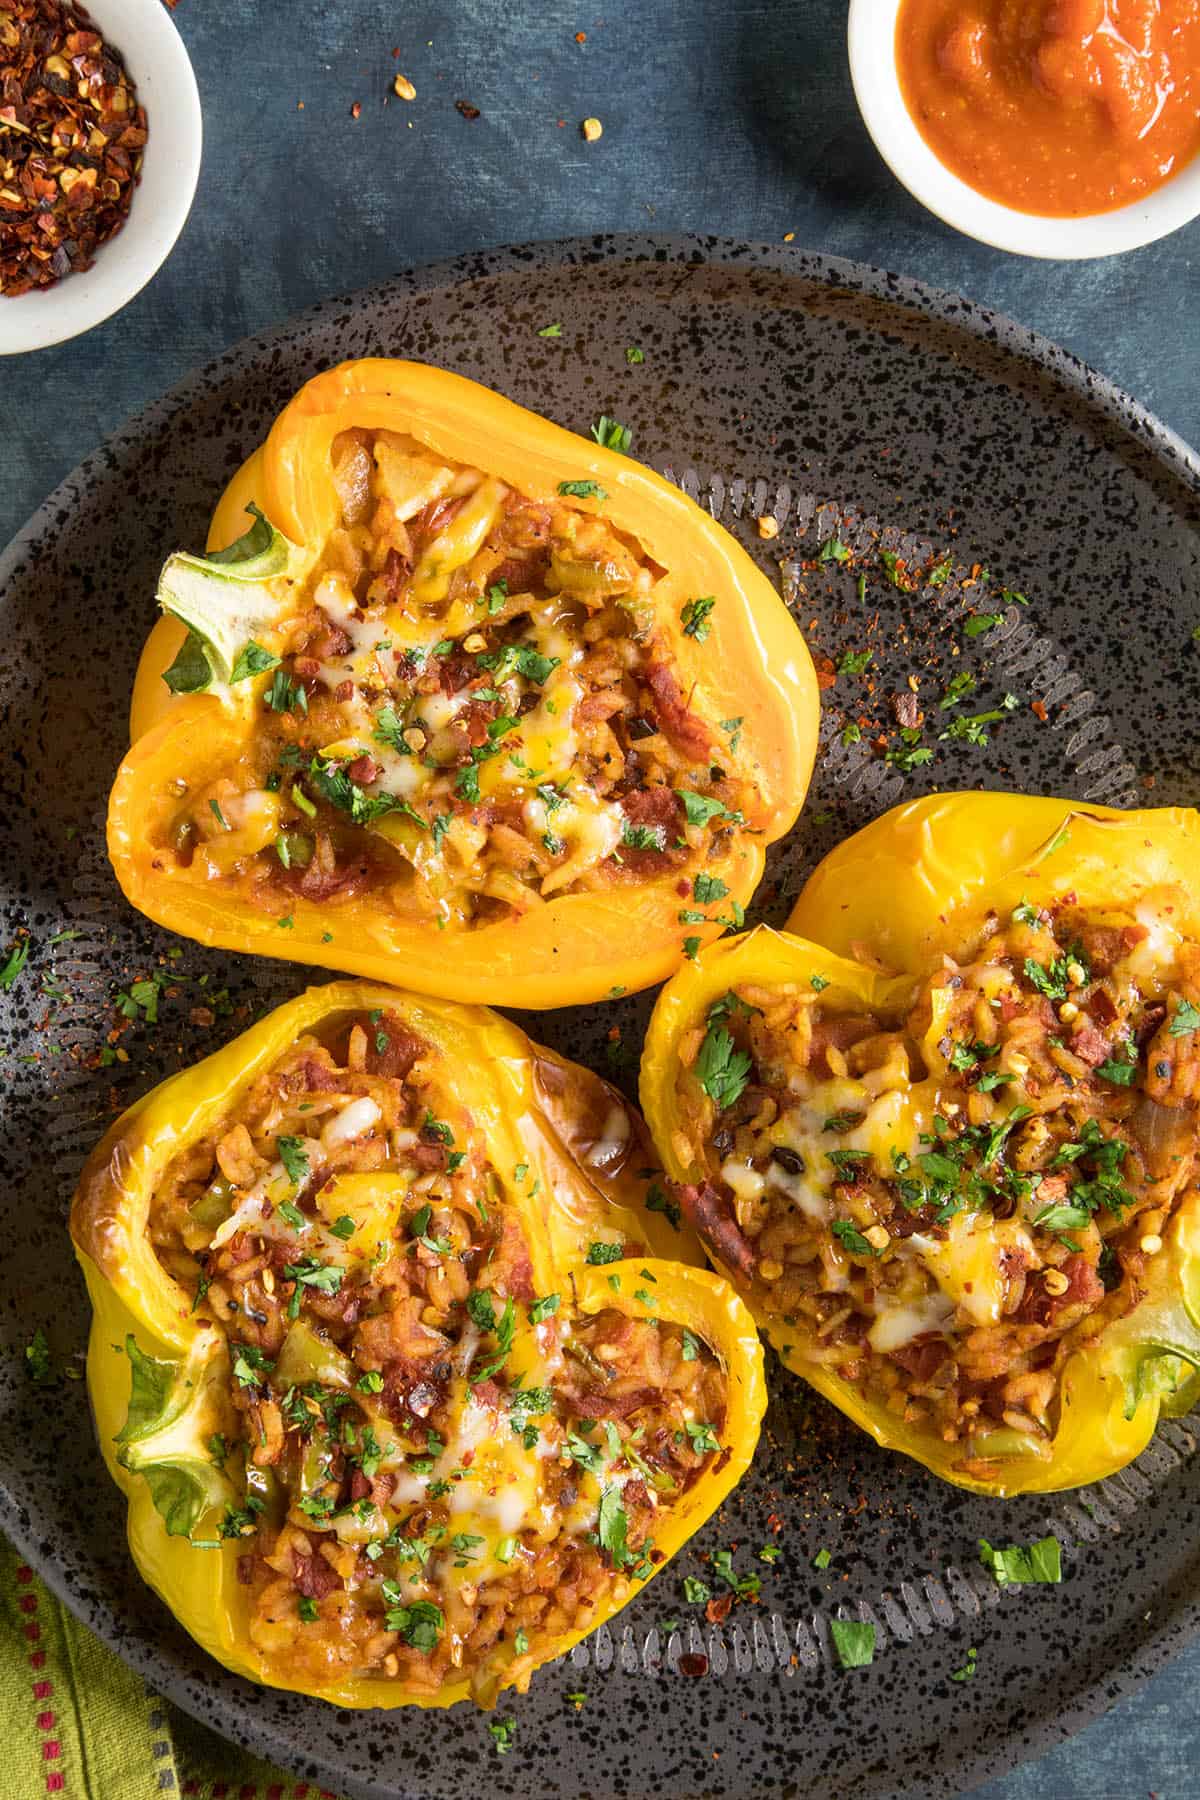 These Vegetarian Stuffed Peppers are stuffed with loads of spicy rice, cheese and more.